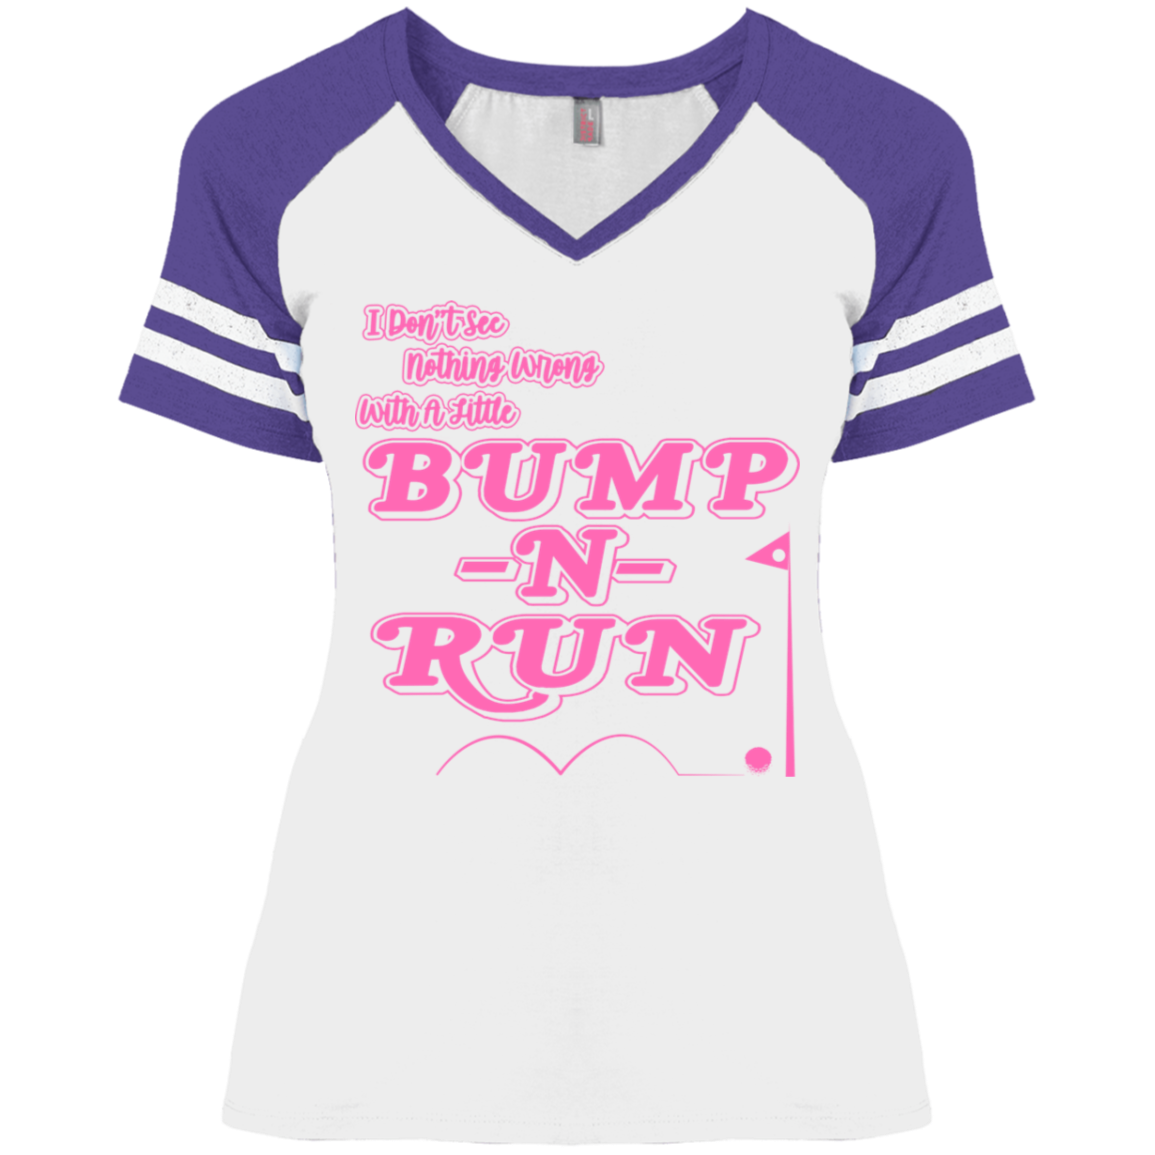 OPG Custom Design #4. I Don't See Noting Wrong With A Little Bump N Run. Ladies' Game V-Neck T-Shirt